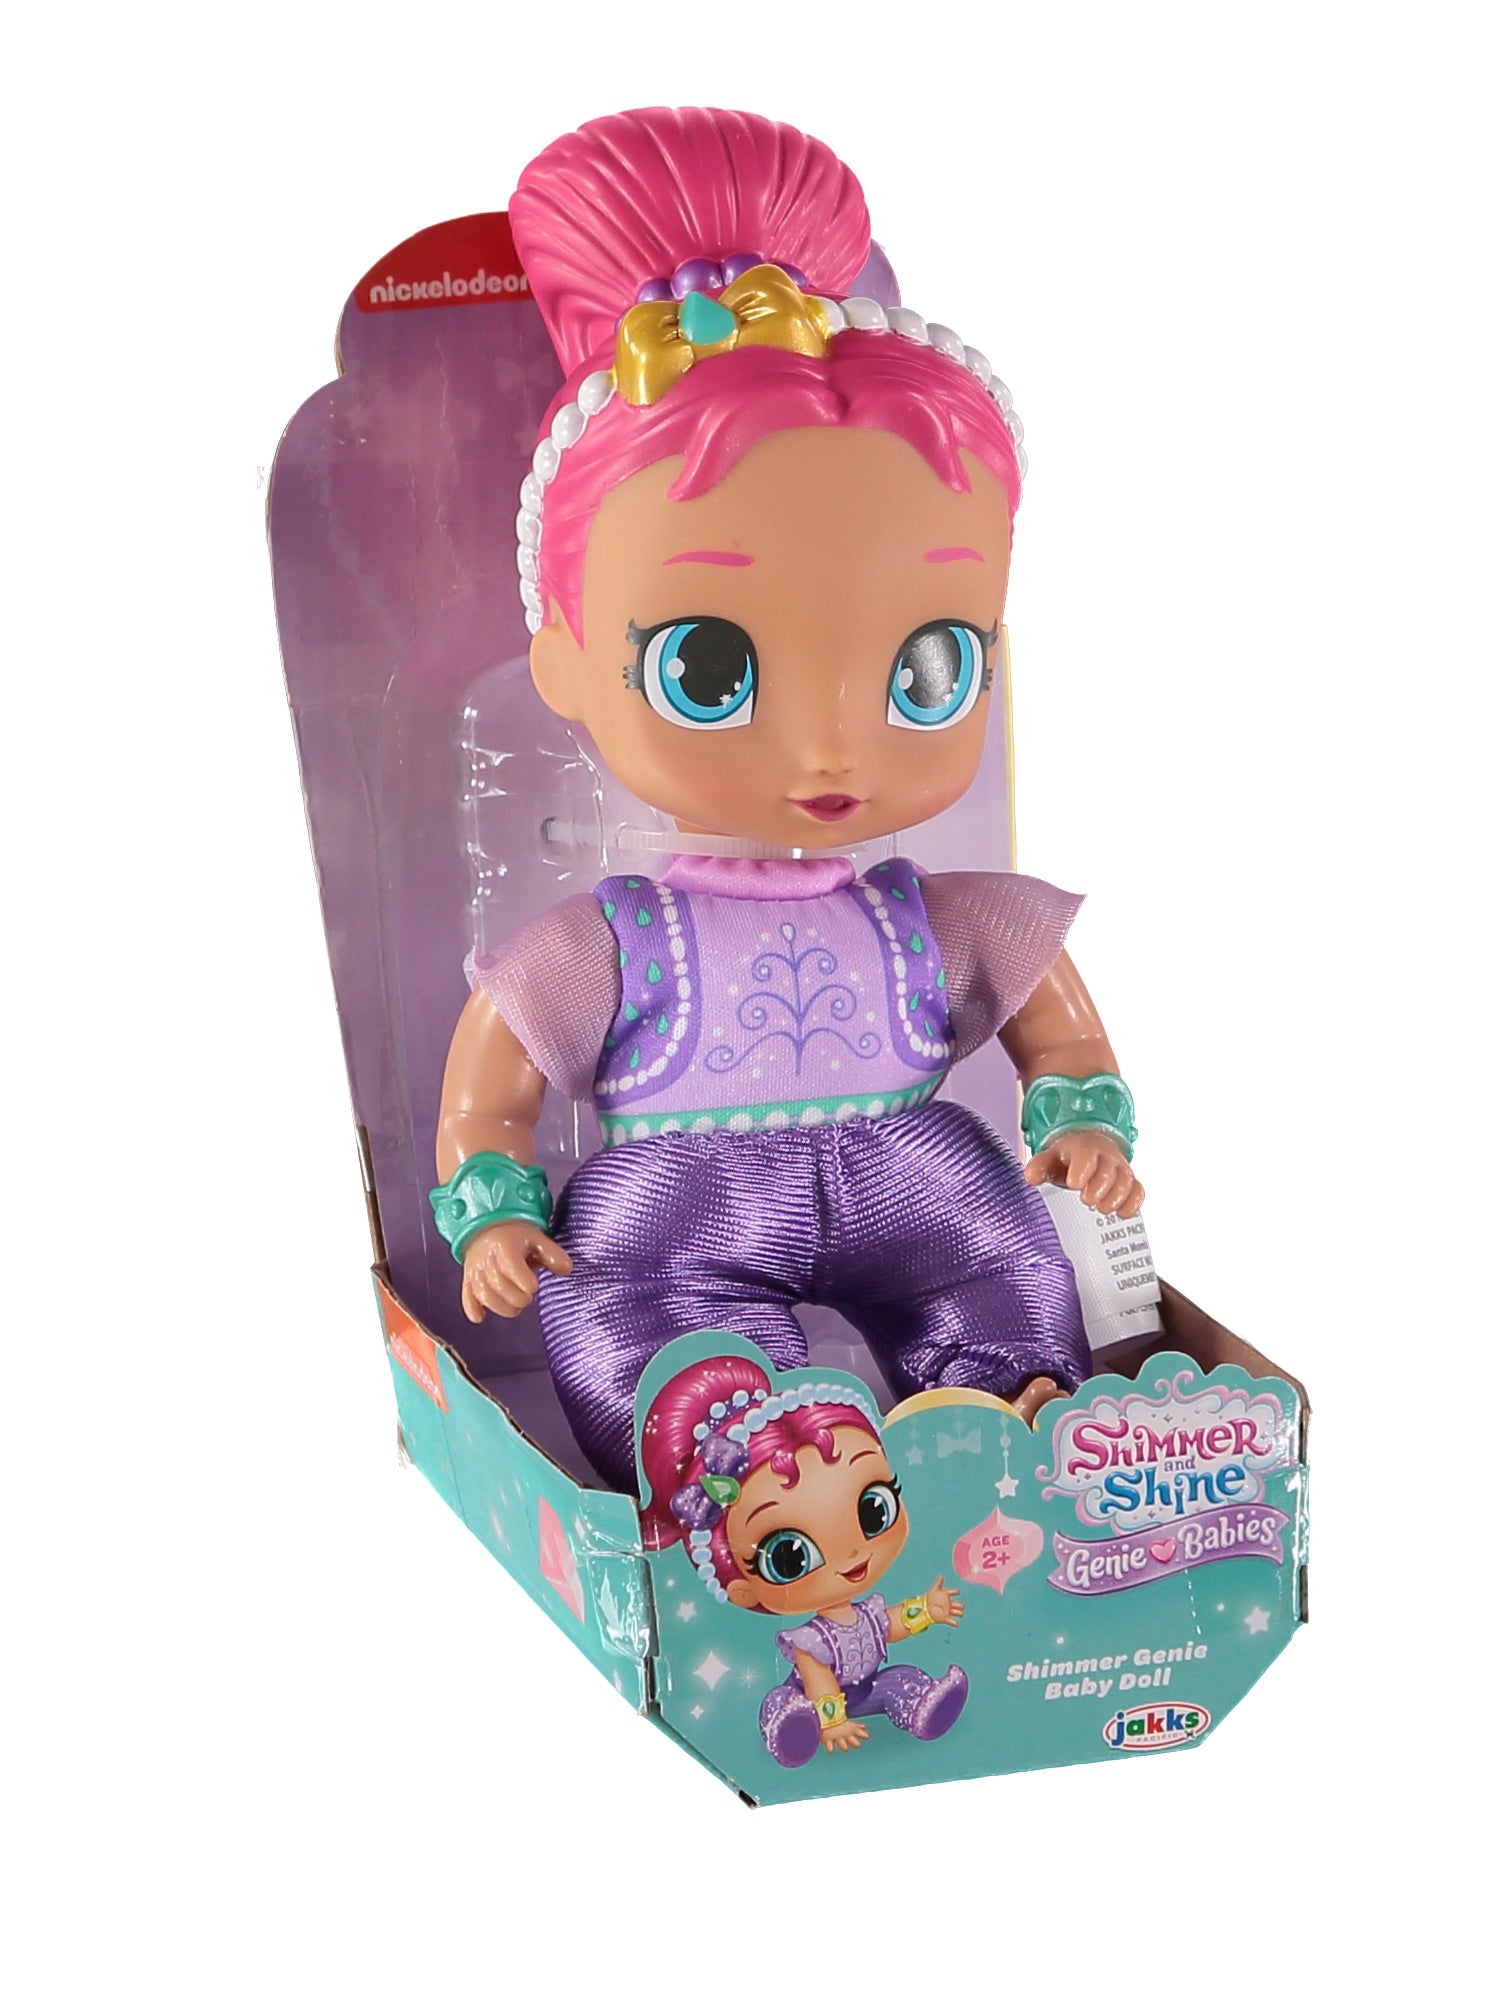 Nickelodeon Shimmer and Shine Genie Babies Baby Doll